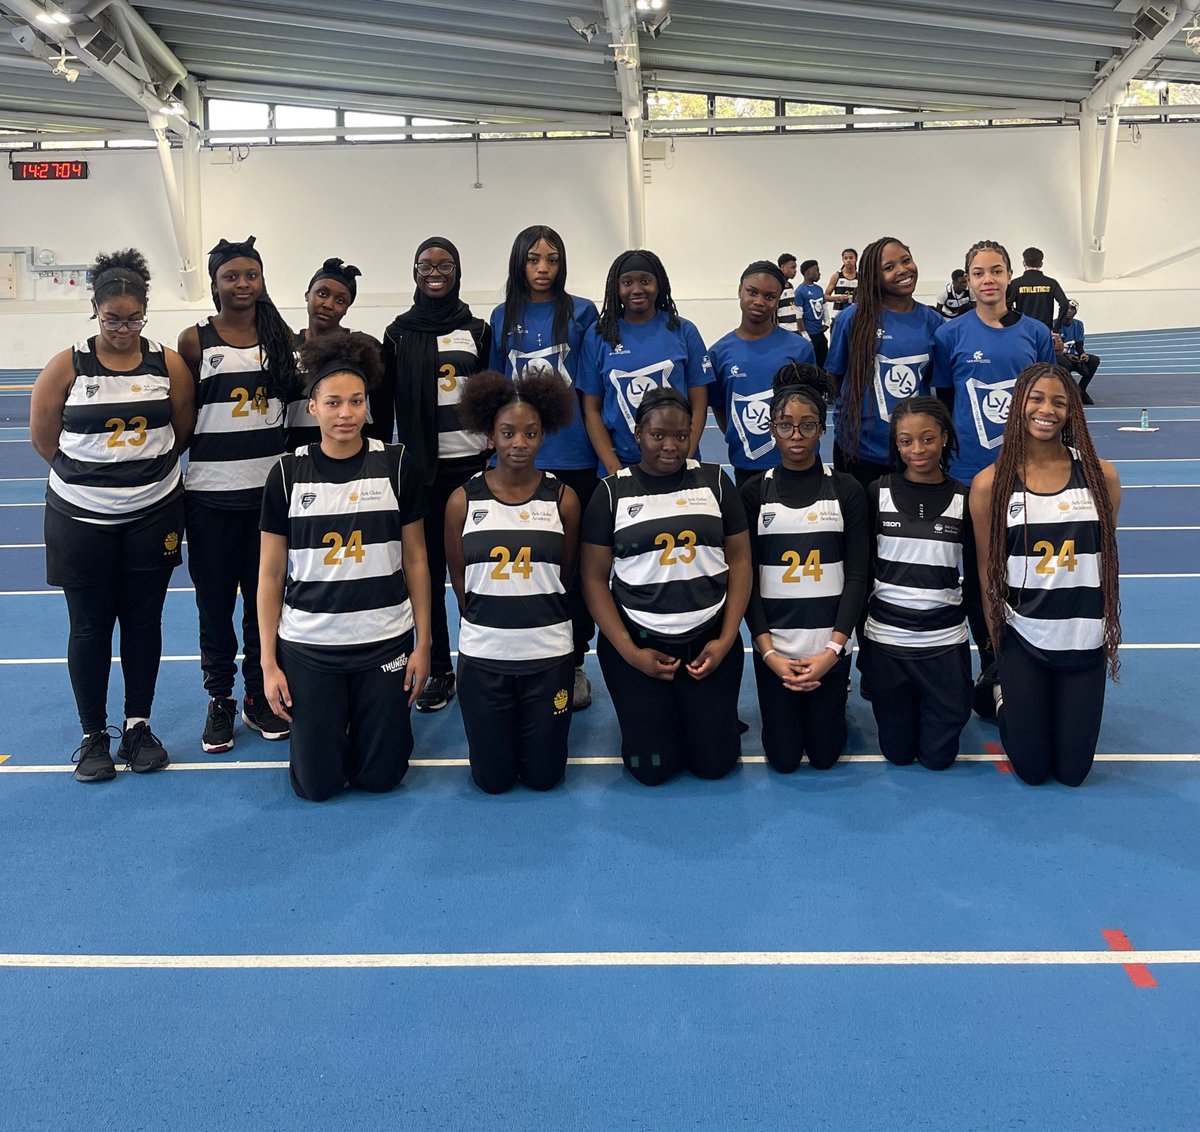 Hat-trick heroes! 🎉Year 9 & 10 secure a triple crown at the Ark Indoor Athletics Championships, dominating both boys and girls categories for the third straight year. Stellar performances all around! 🏆👟 👏 #ThreePeatChamps #ArkAthletics @MattJones_Globe @ArkSchoolsSport